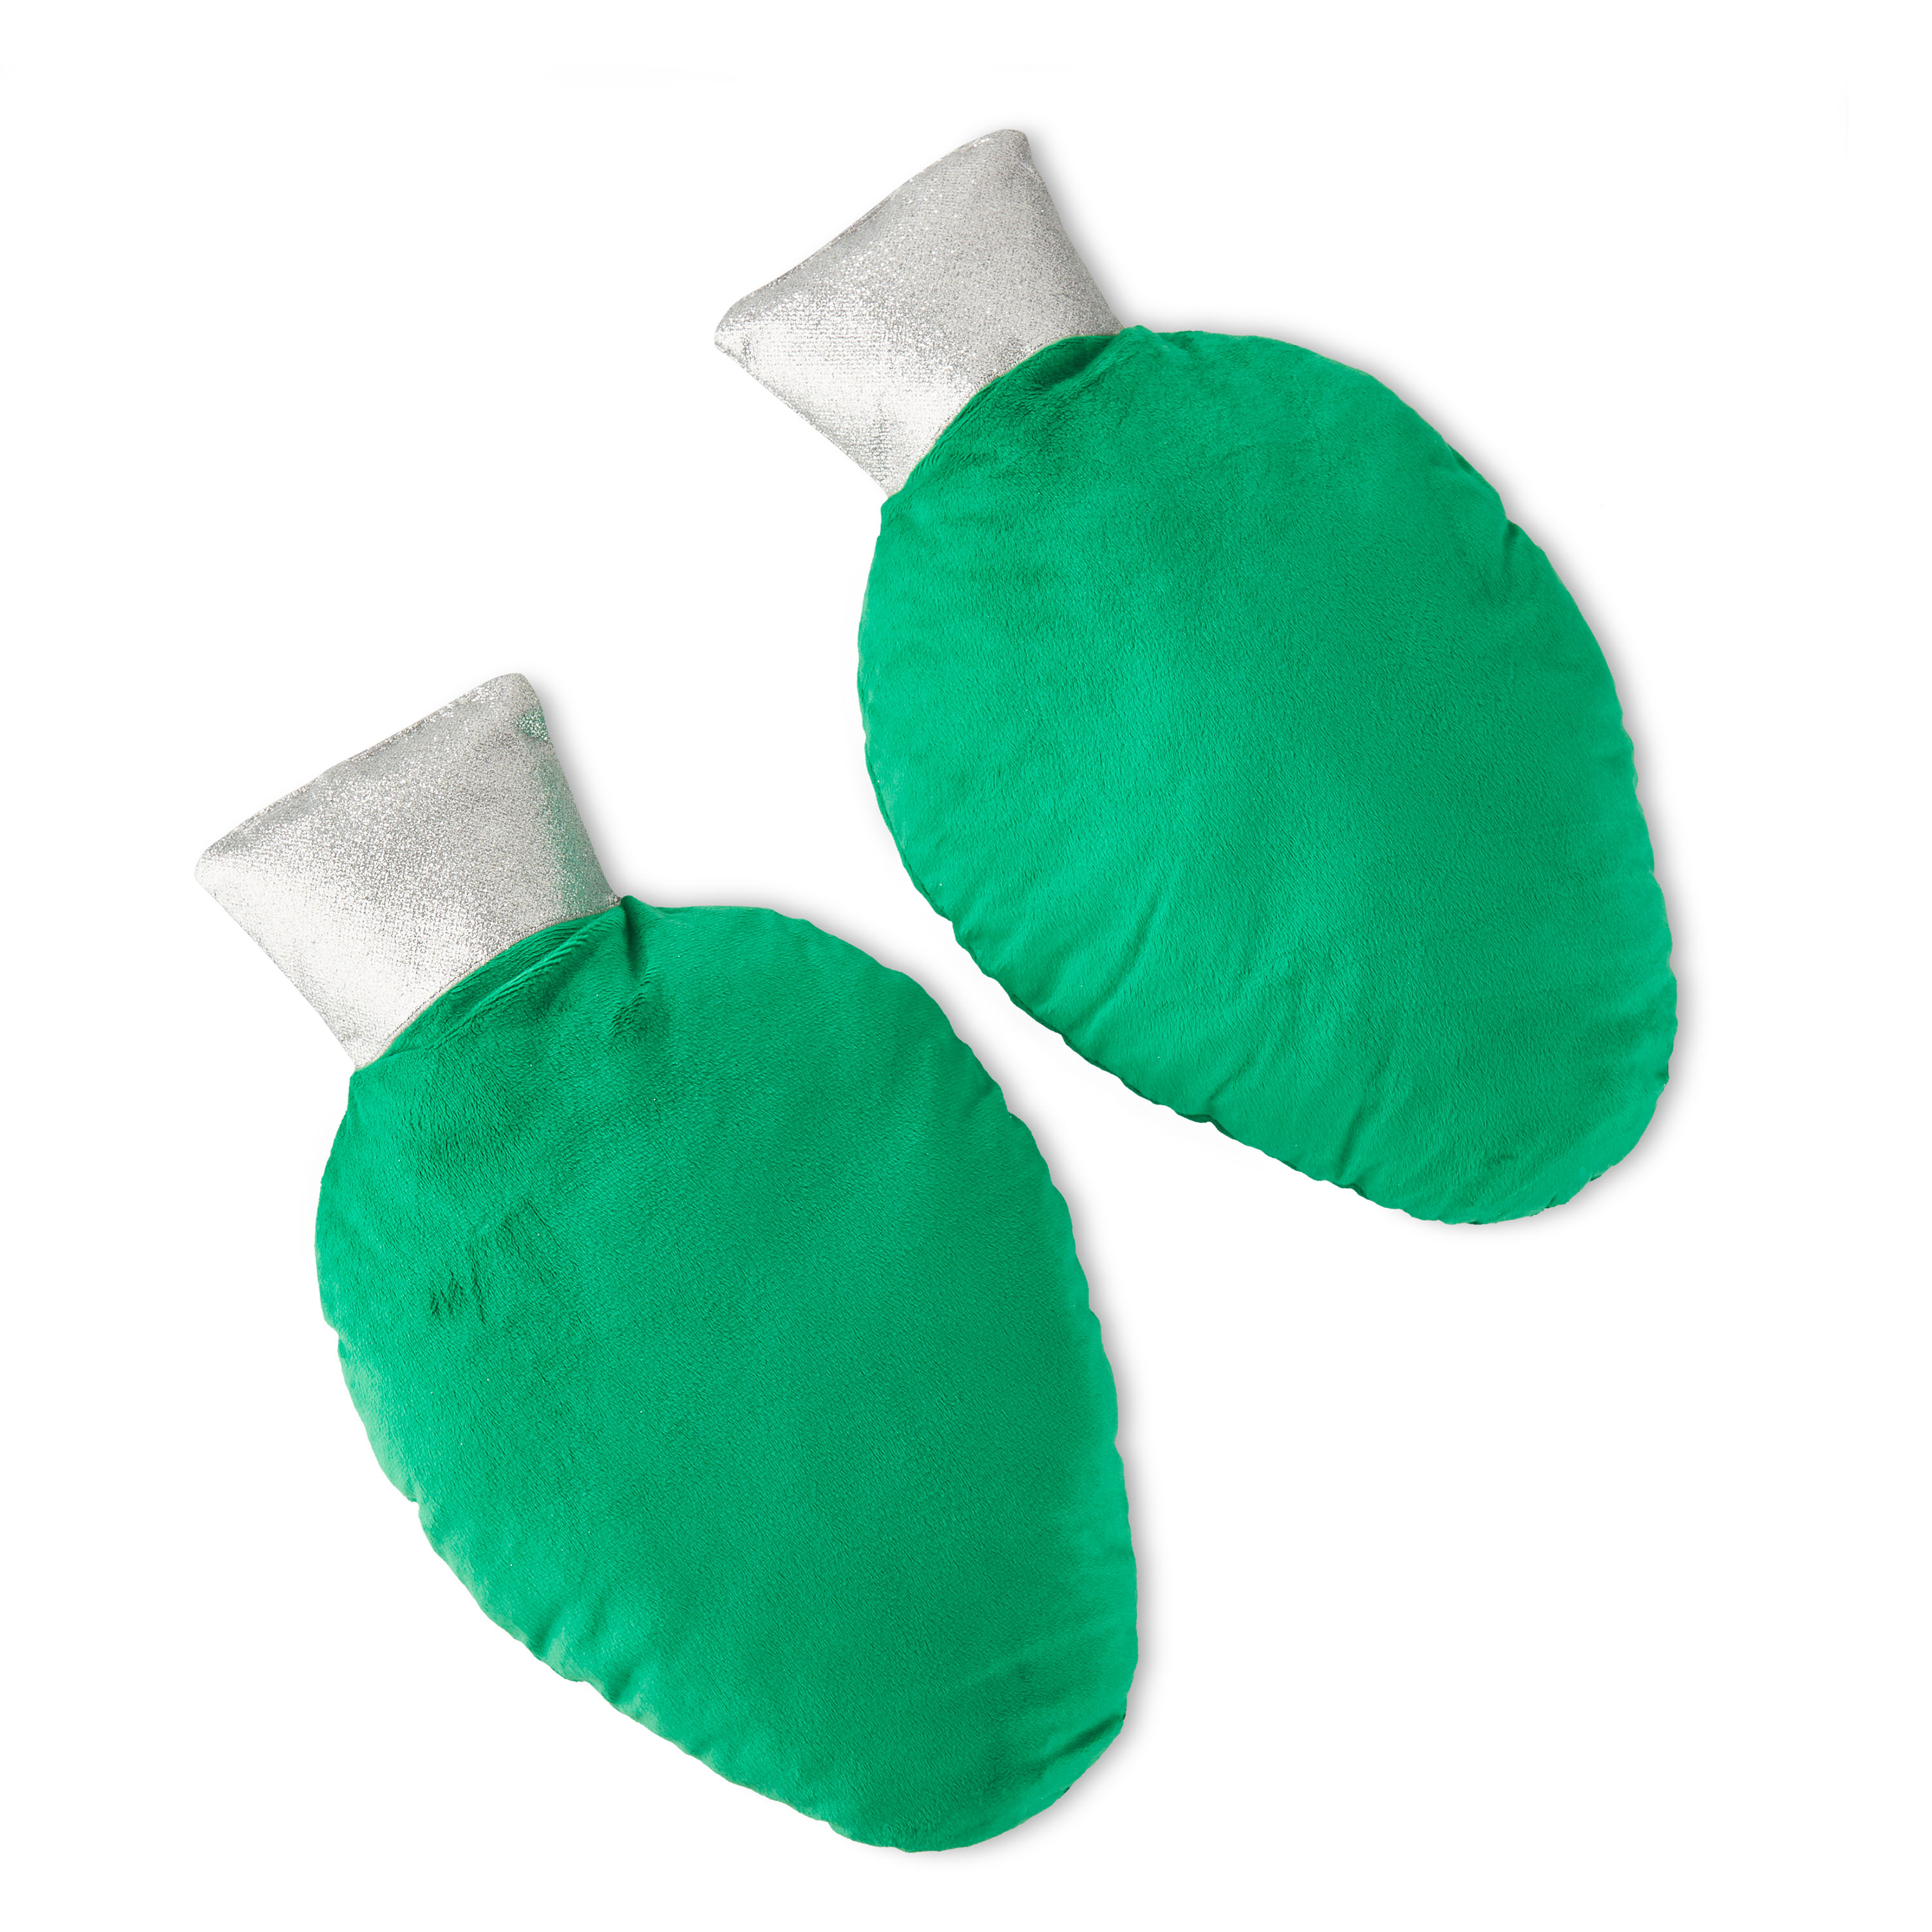 Holiday Time Christmas 15 inch Green C9 Bulb Decorative Pillows Plush, 2-pack - image 5 of 6